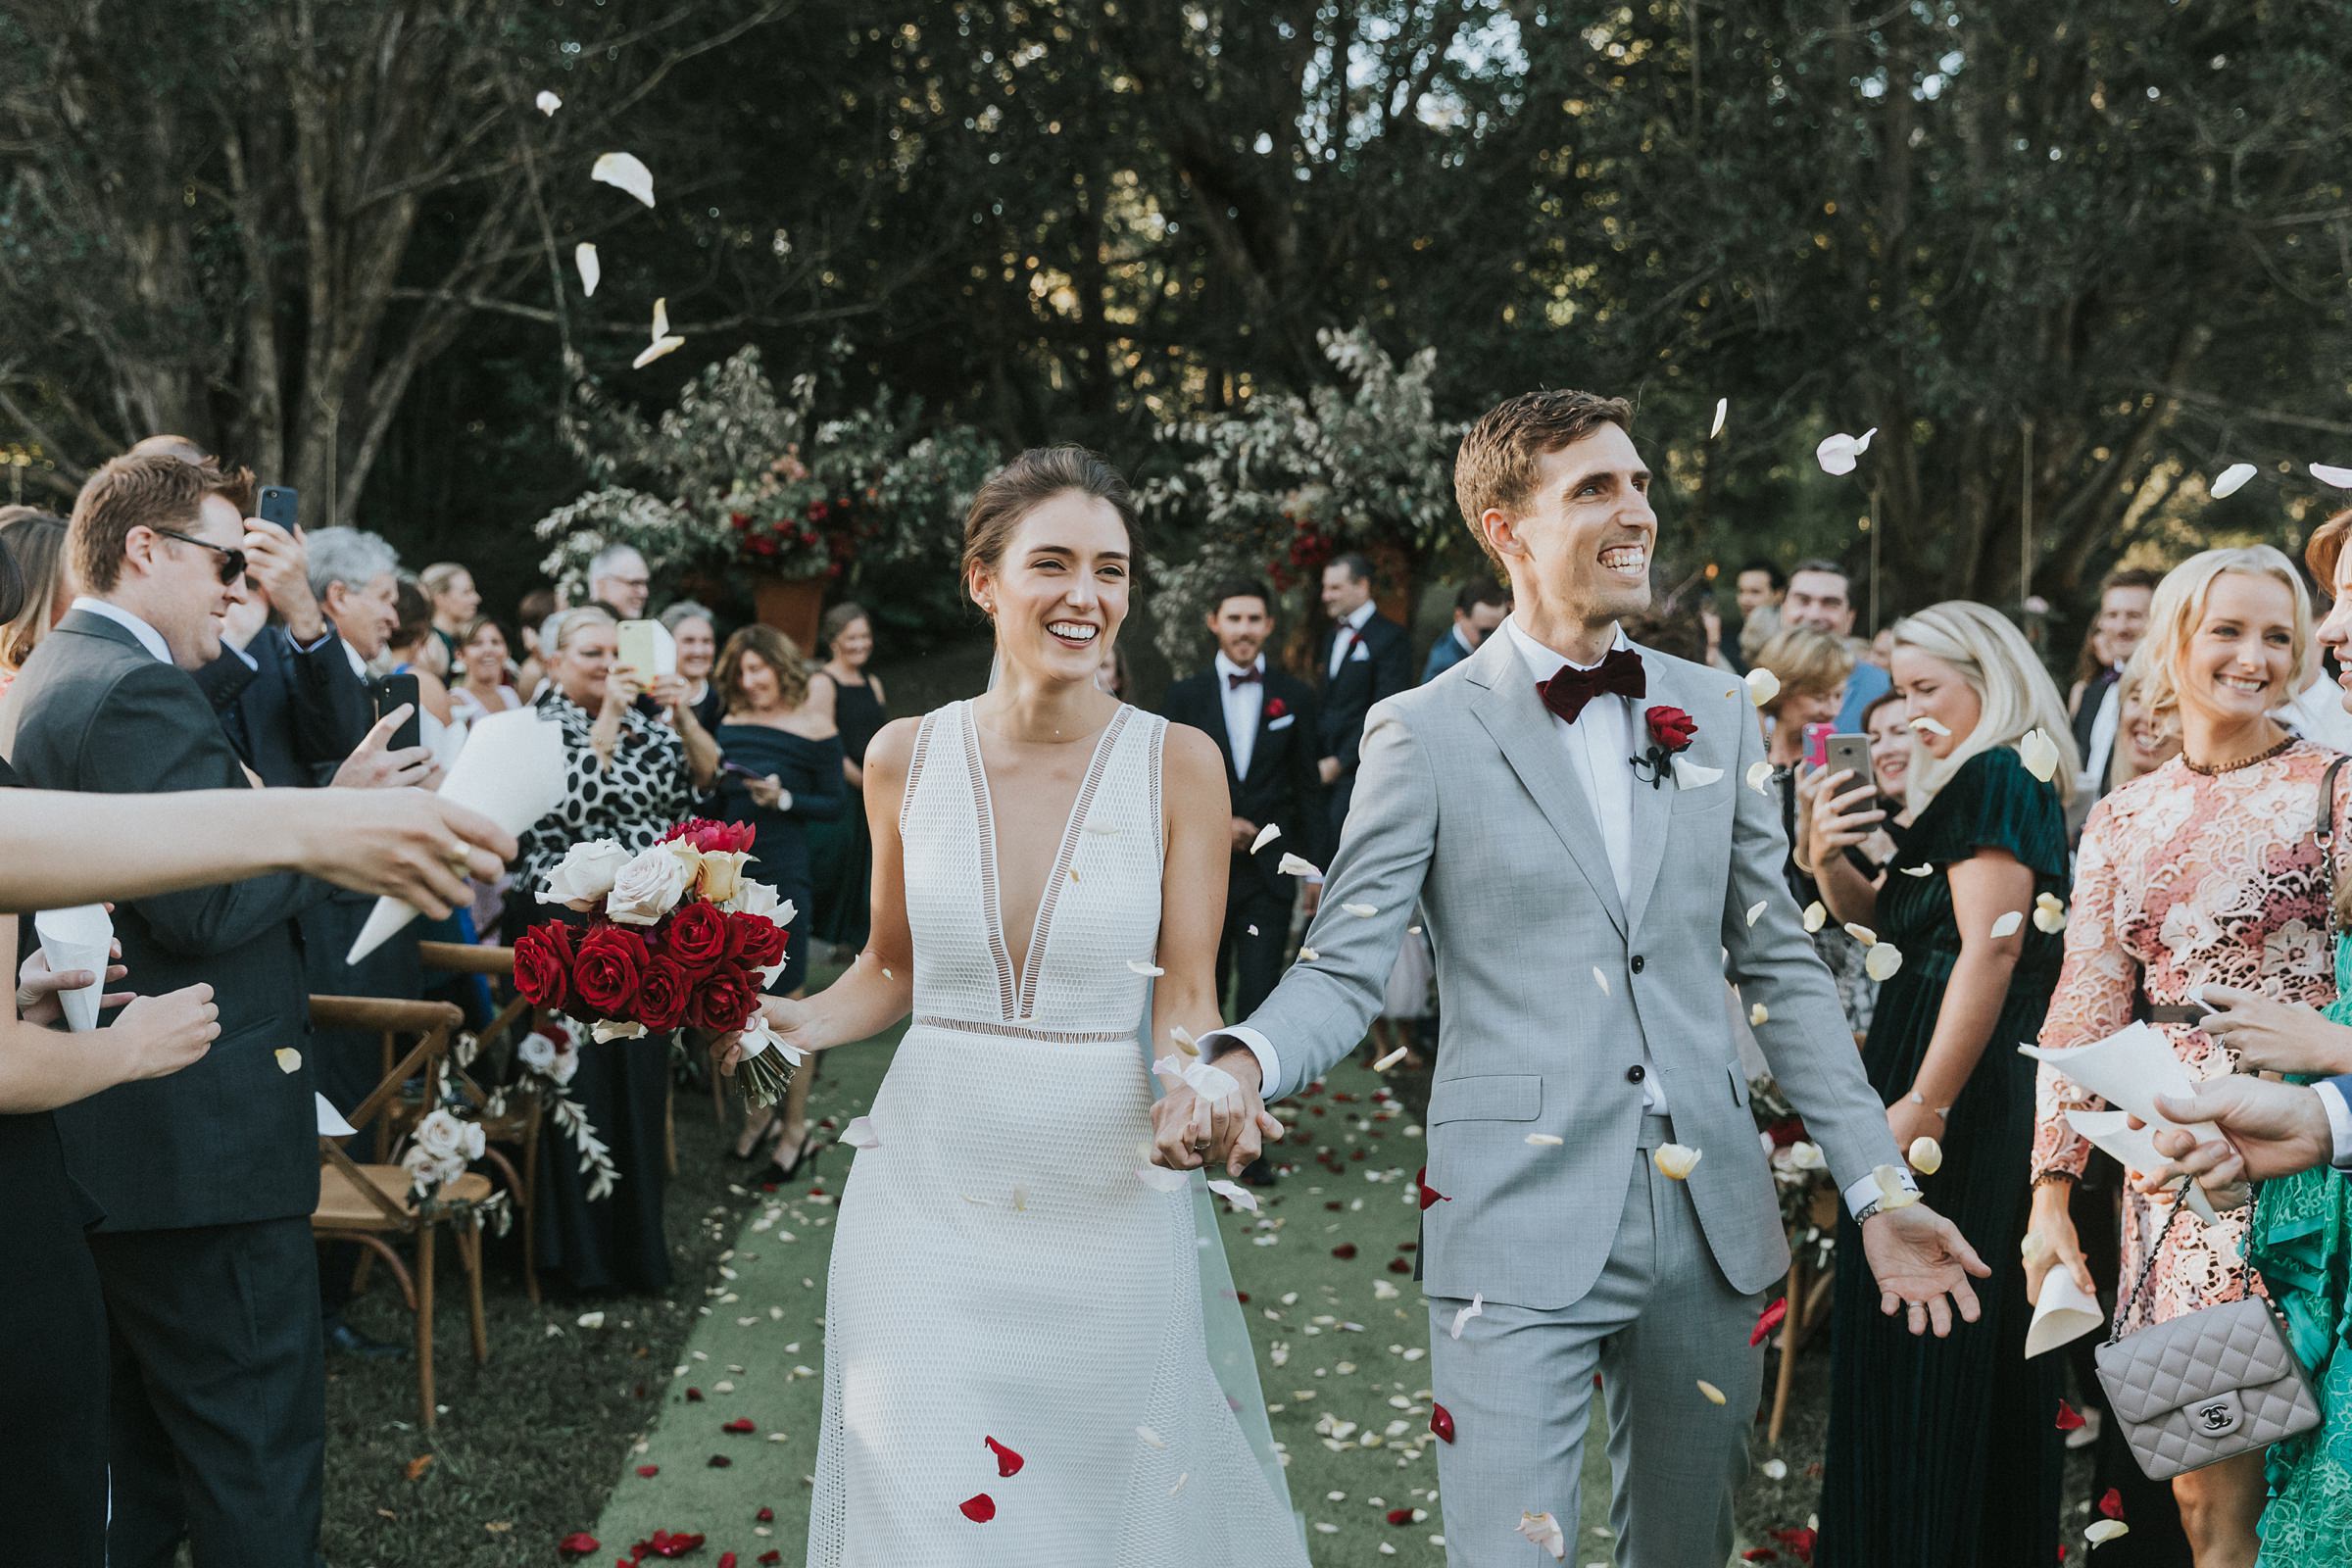 rose petals and confetti being thrown at bride and groom at wedding ceremony